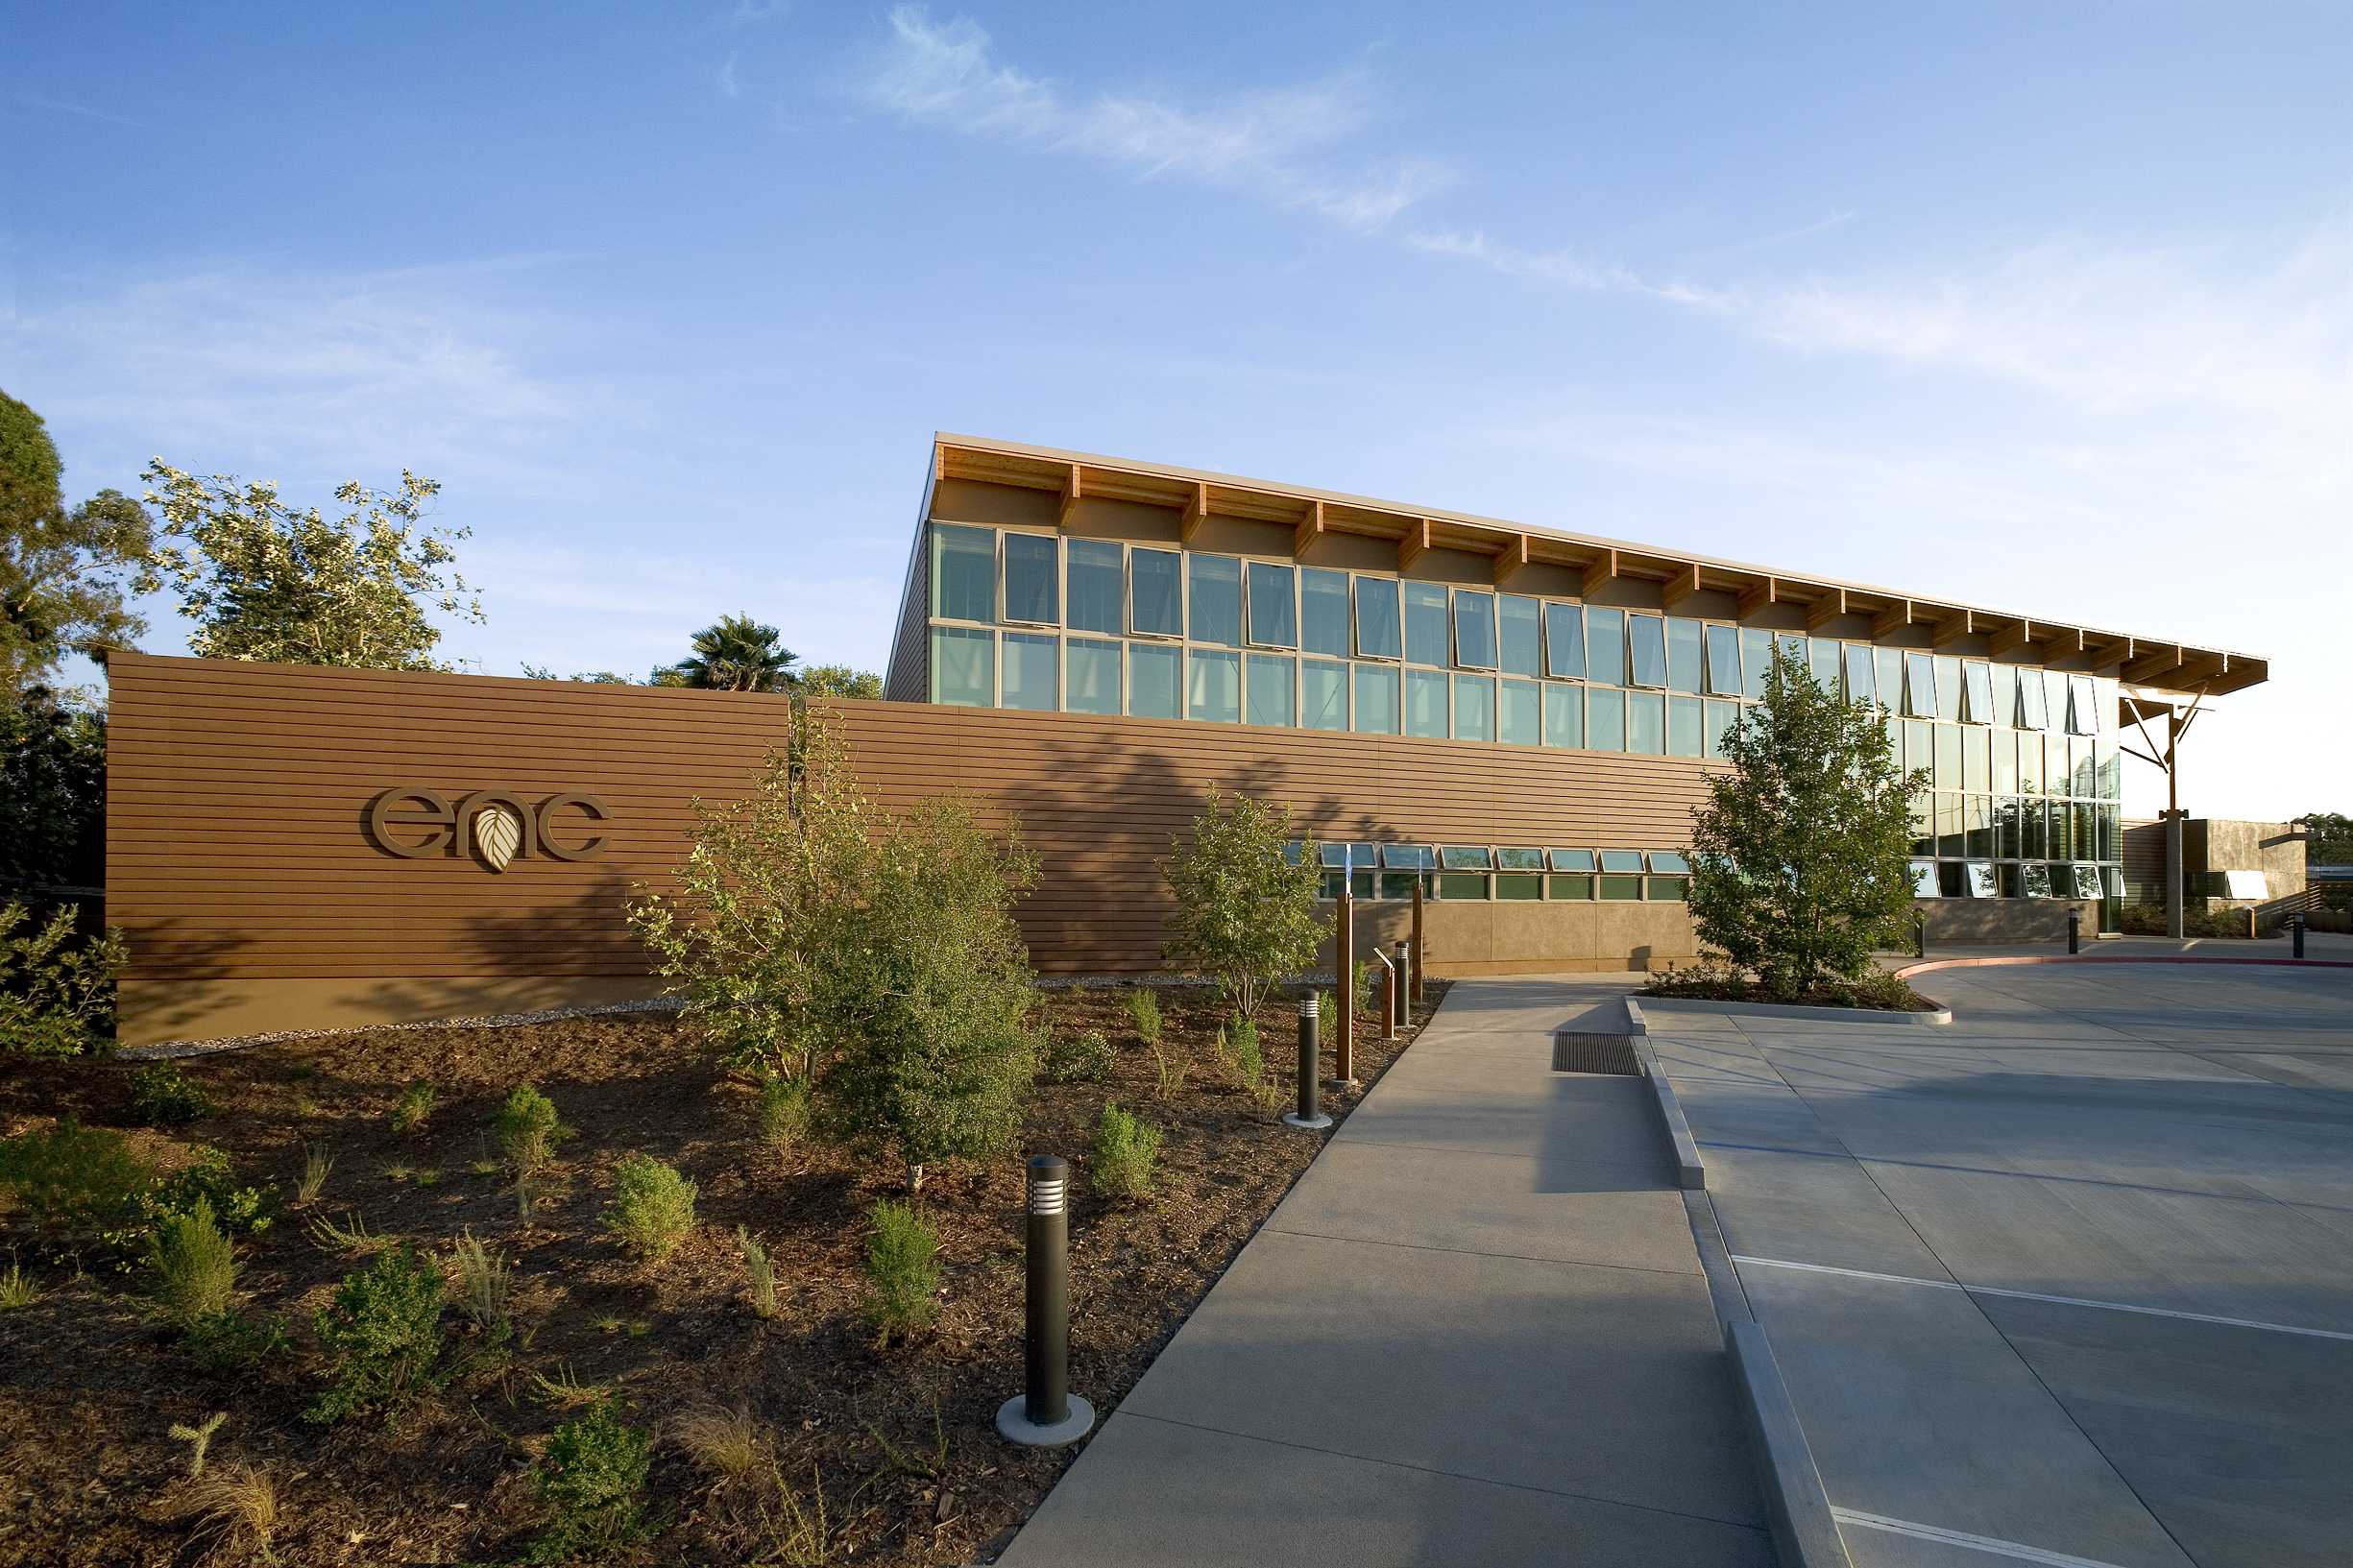 One of D’Amato’s notable projects in his career is the Environmental Nature Center in Newport Beach, California—the first LEED Platinum project in Orange County, California.